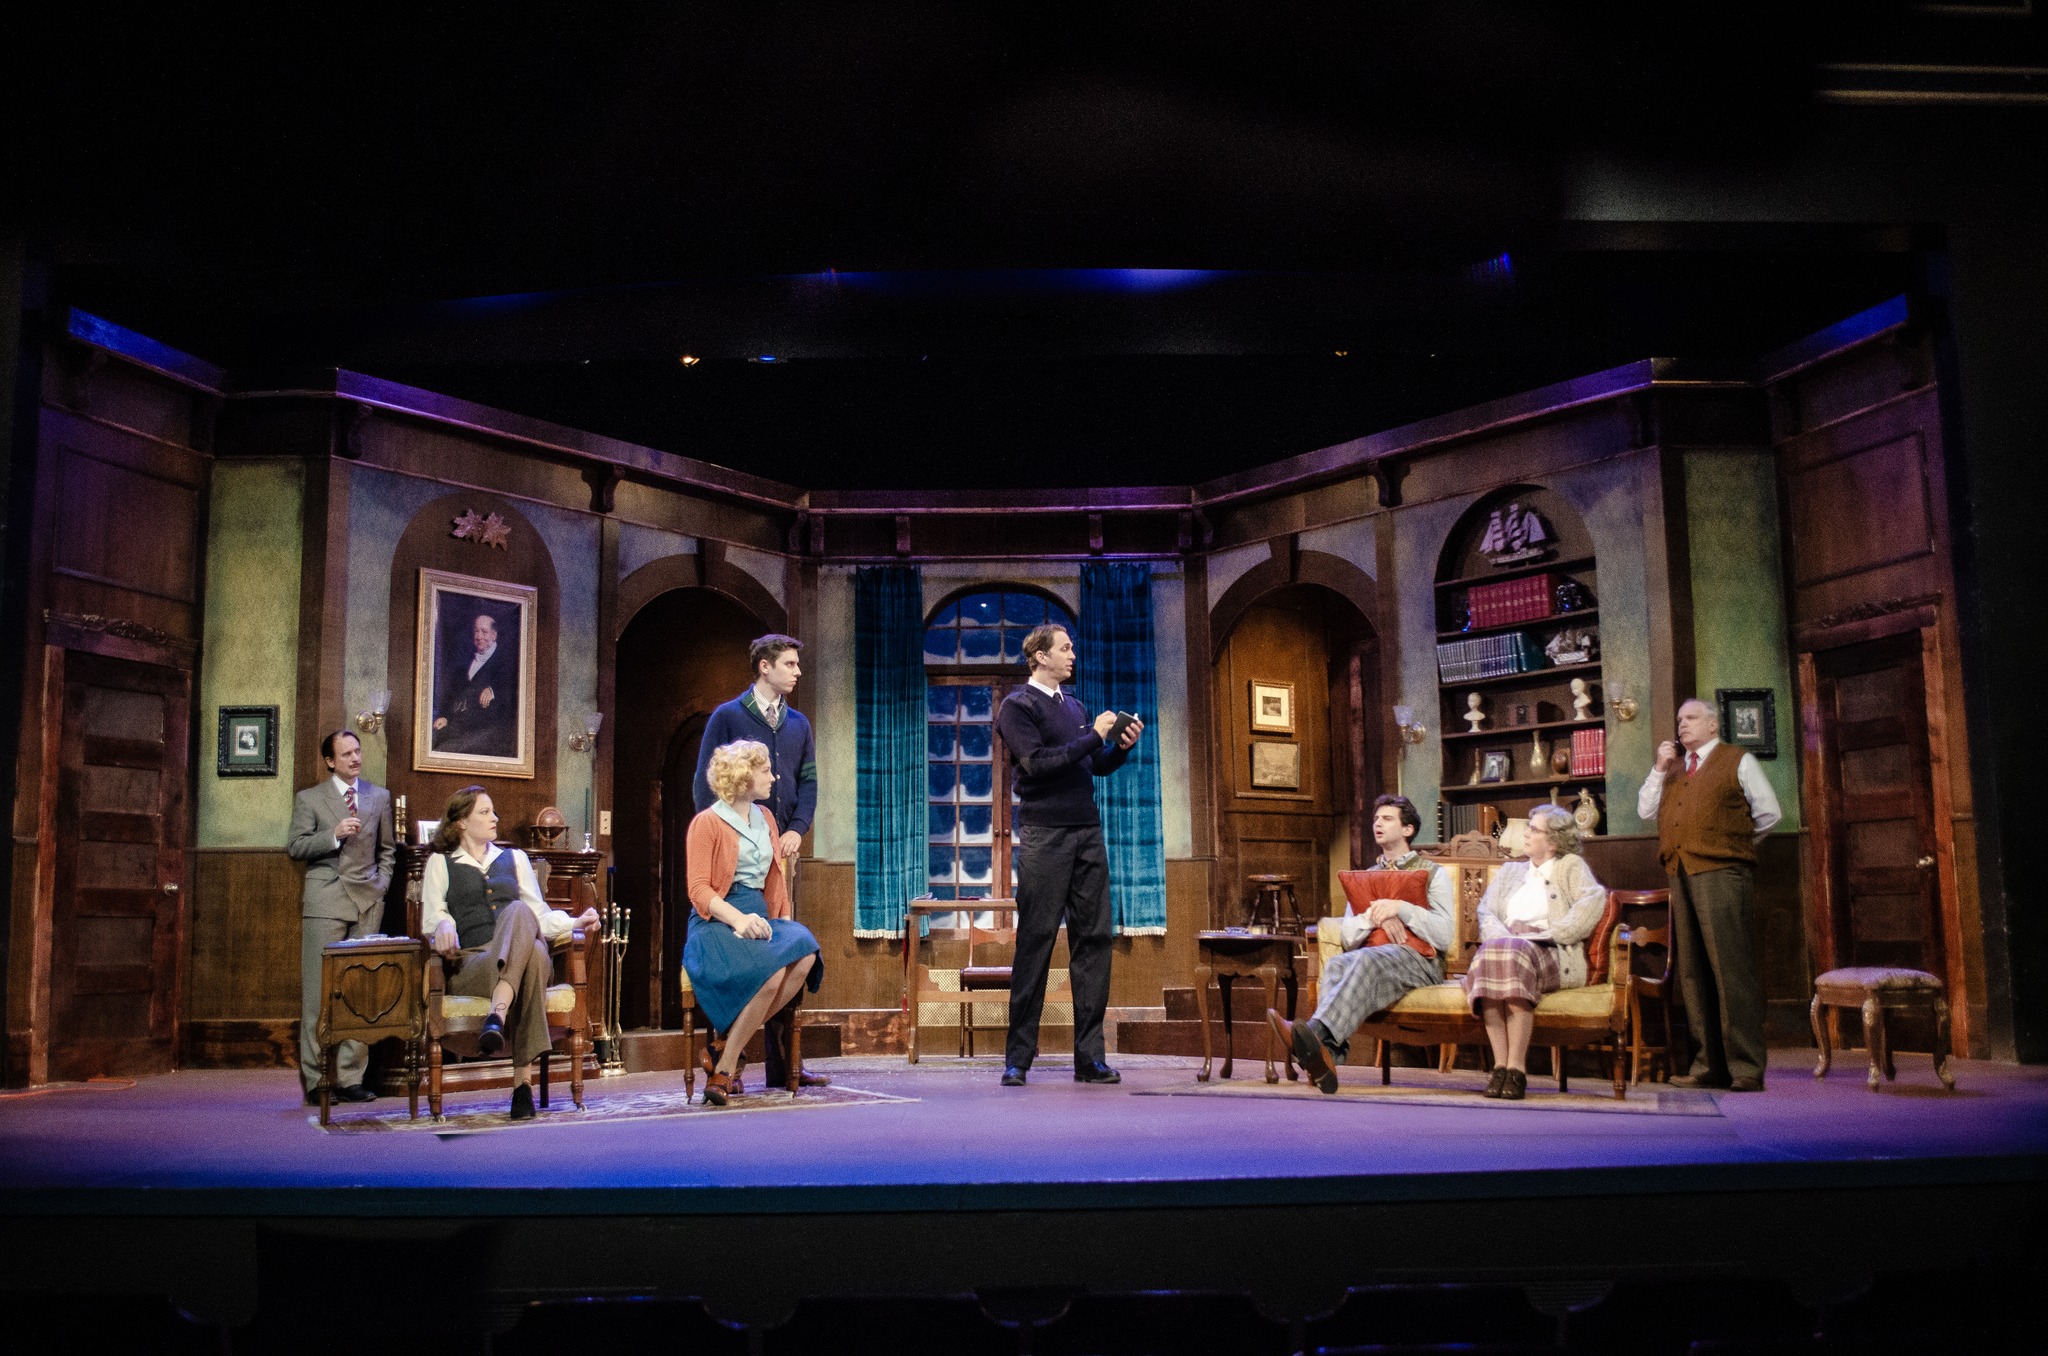 The Mousetrap - 70th Anniversary Tour - Exeter Northcott Theatre